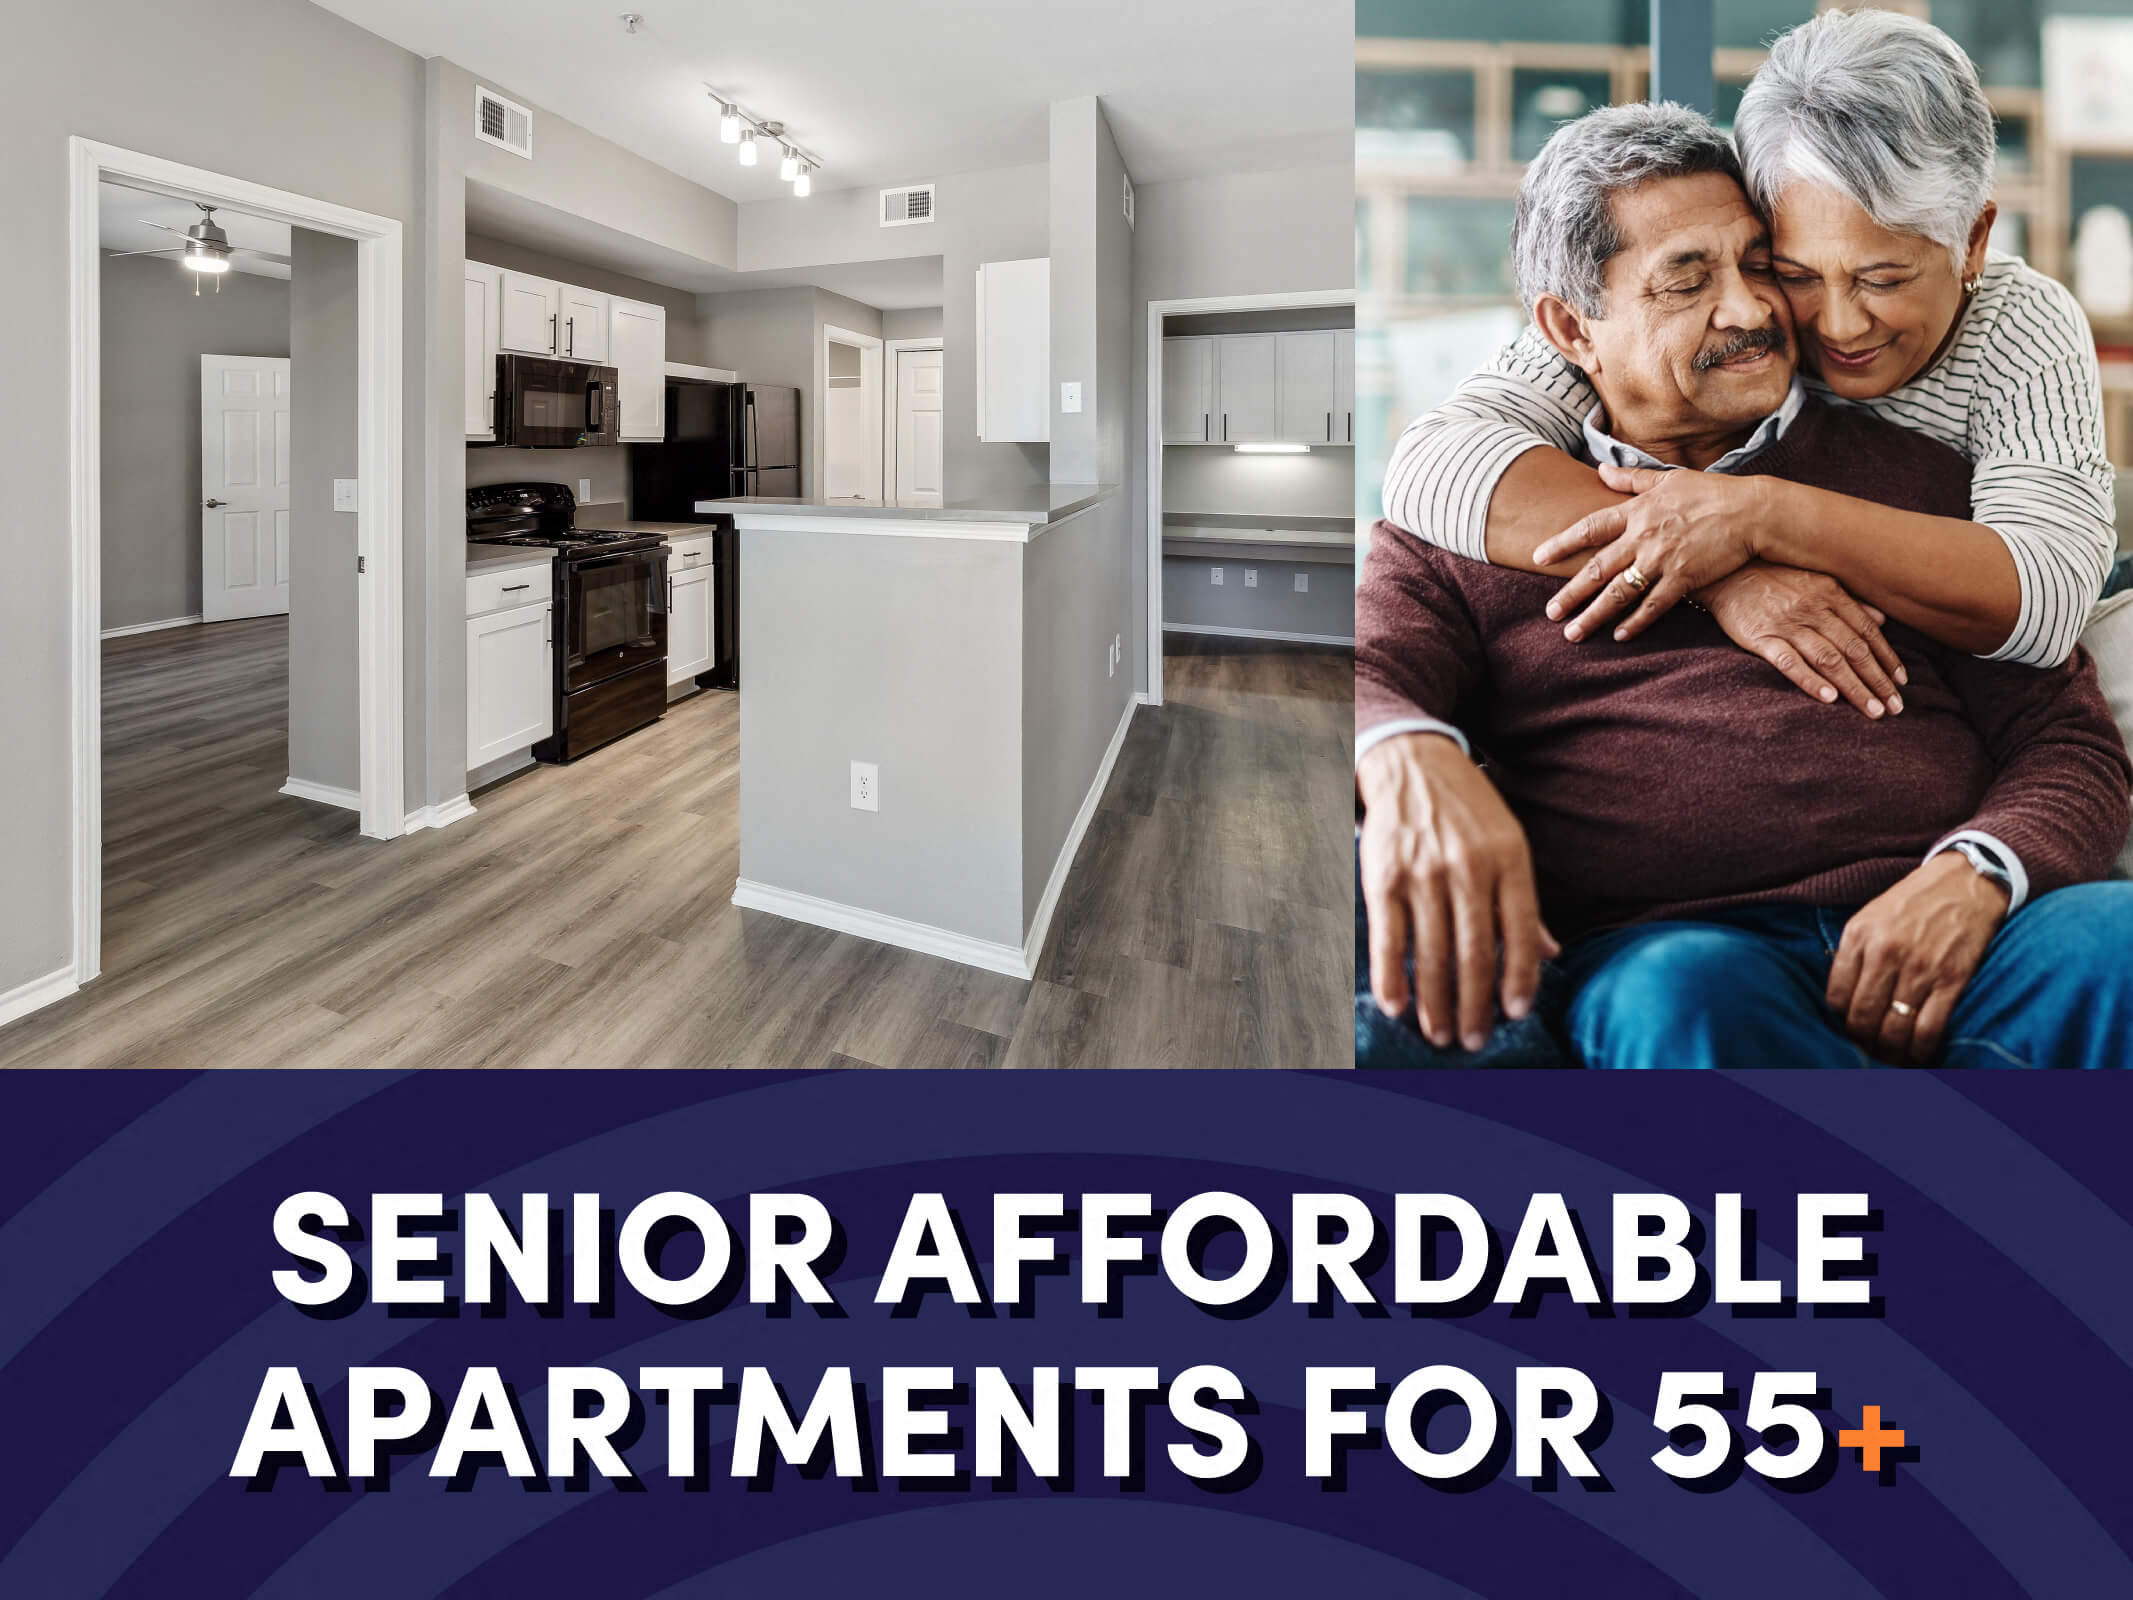 A modern kitchen next to a senior couple hugging above text that reads “Senior Affordable Apartments for 55+” at The Sorento apartments in San Antonio, Texas.